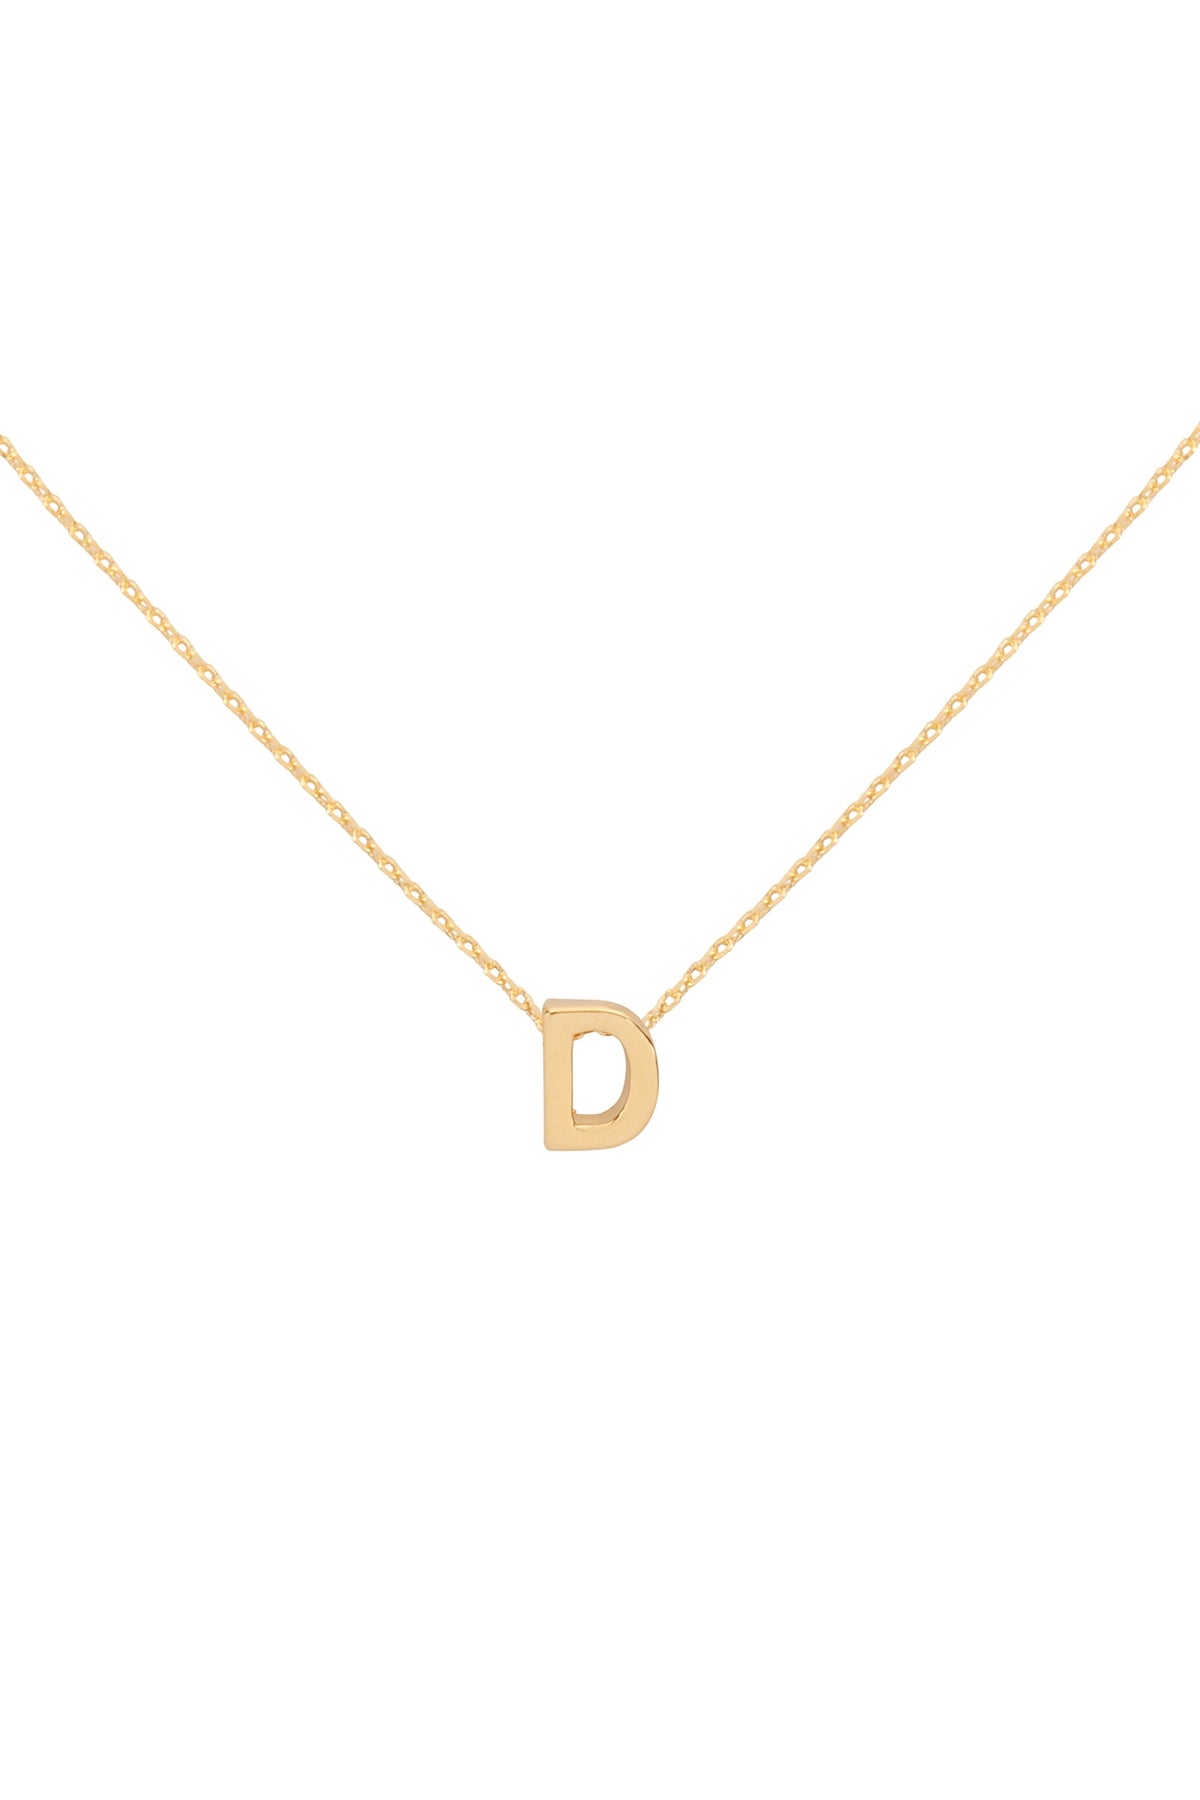 "D" INITIAL DAINTY CHARM NECKLACE